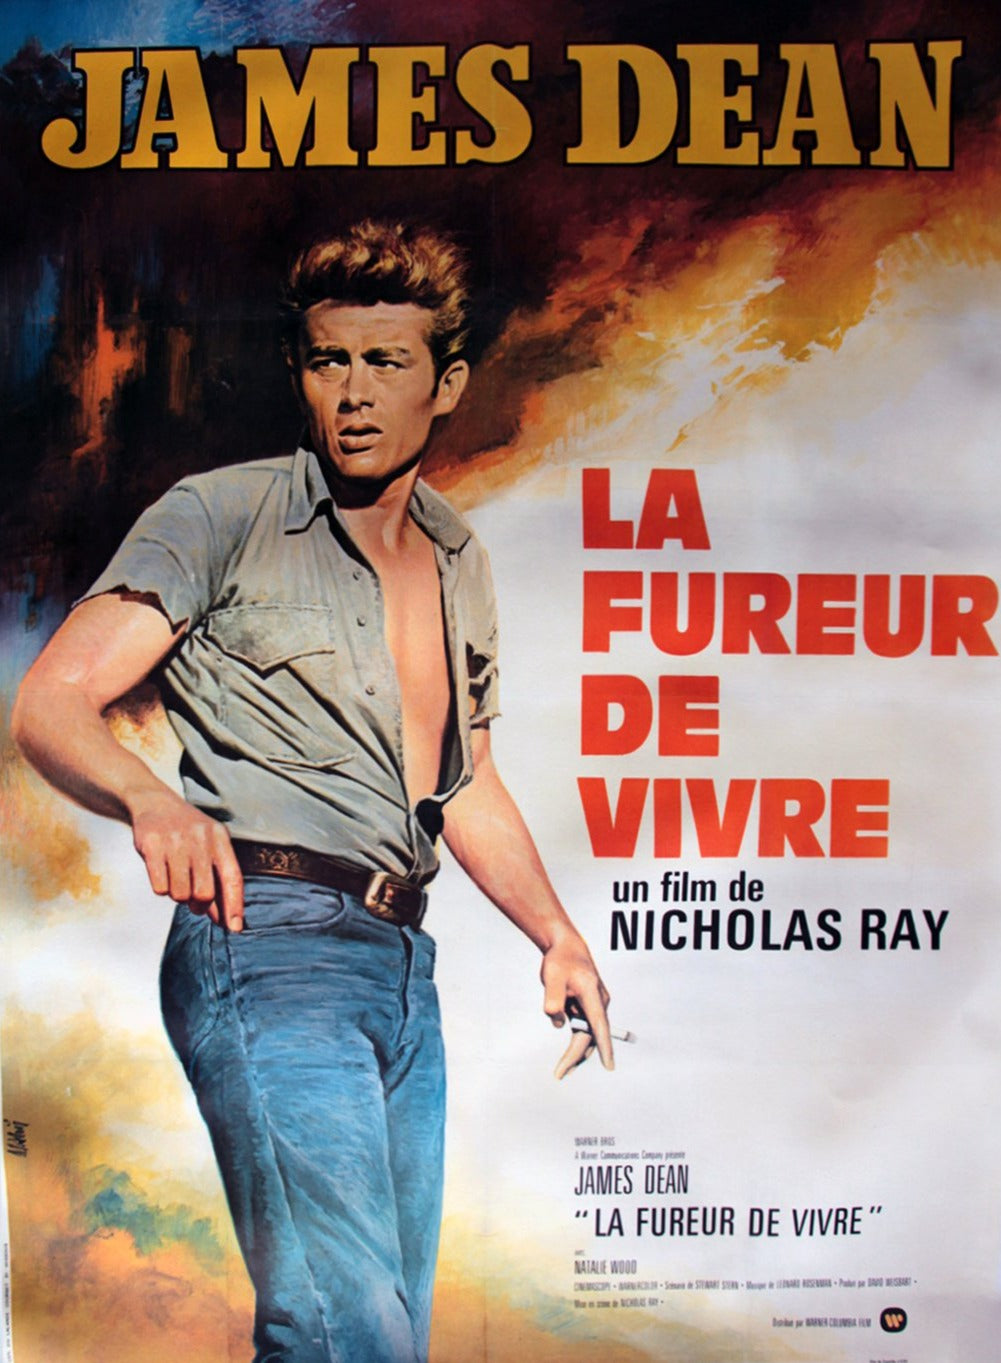 Rebel Without a Cause (French)